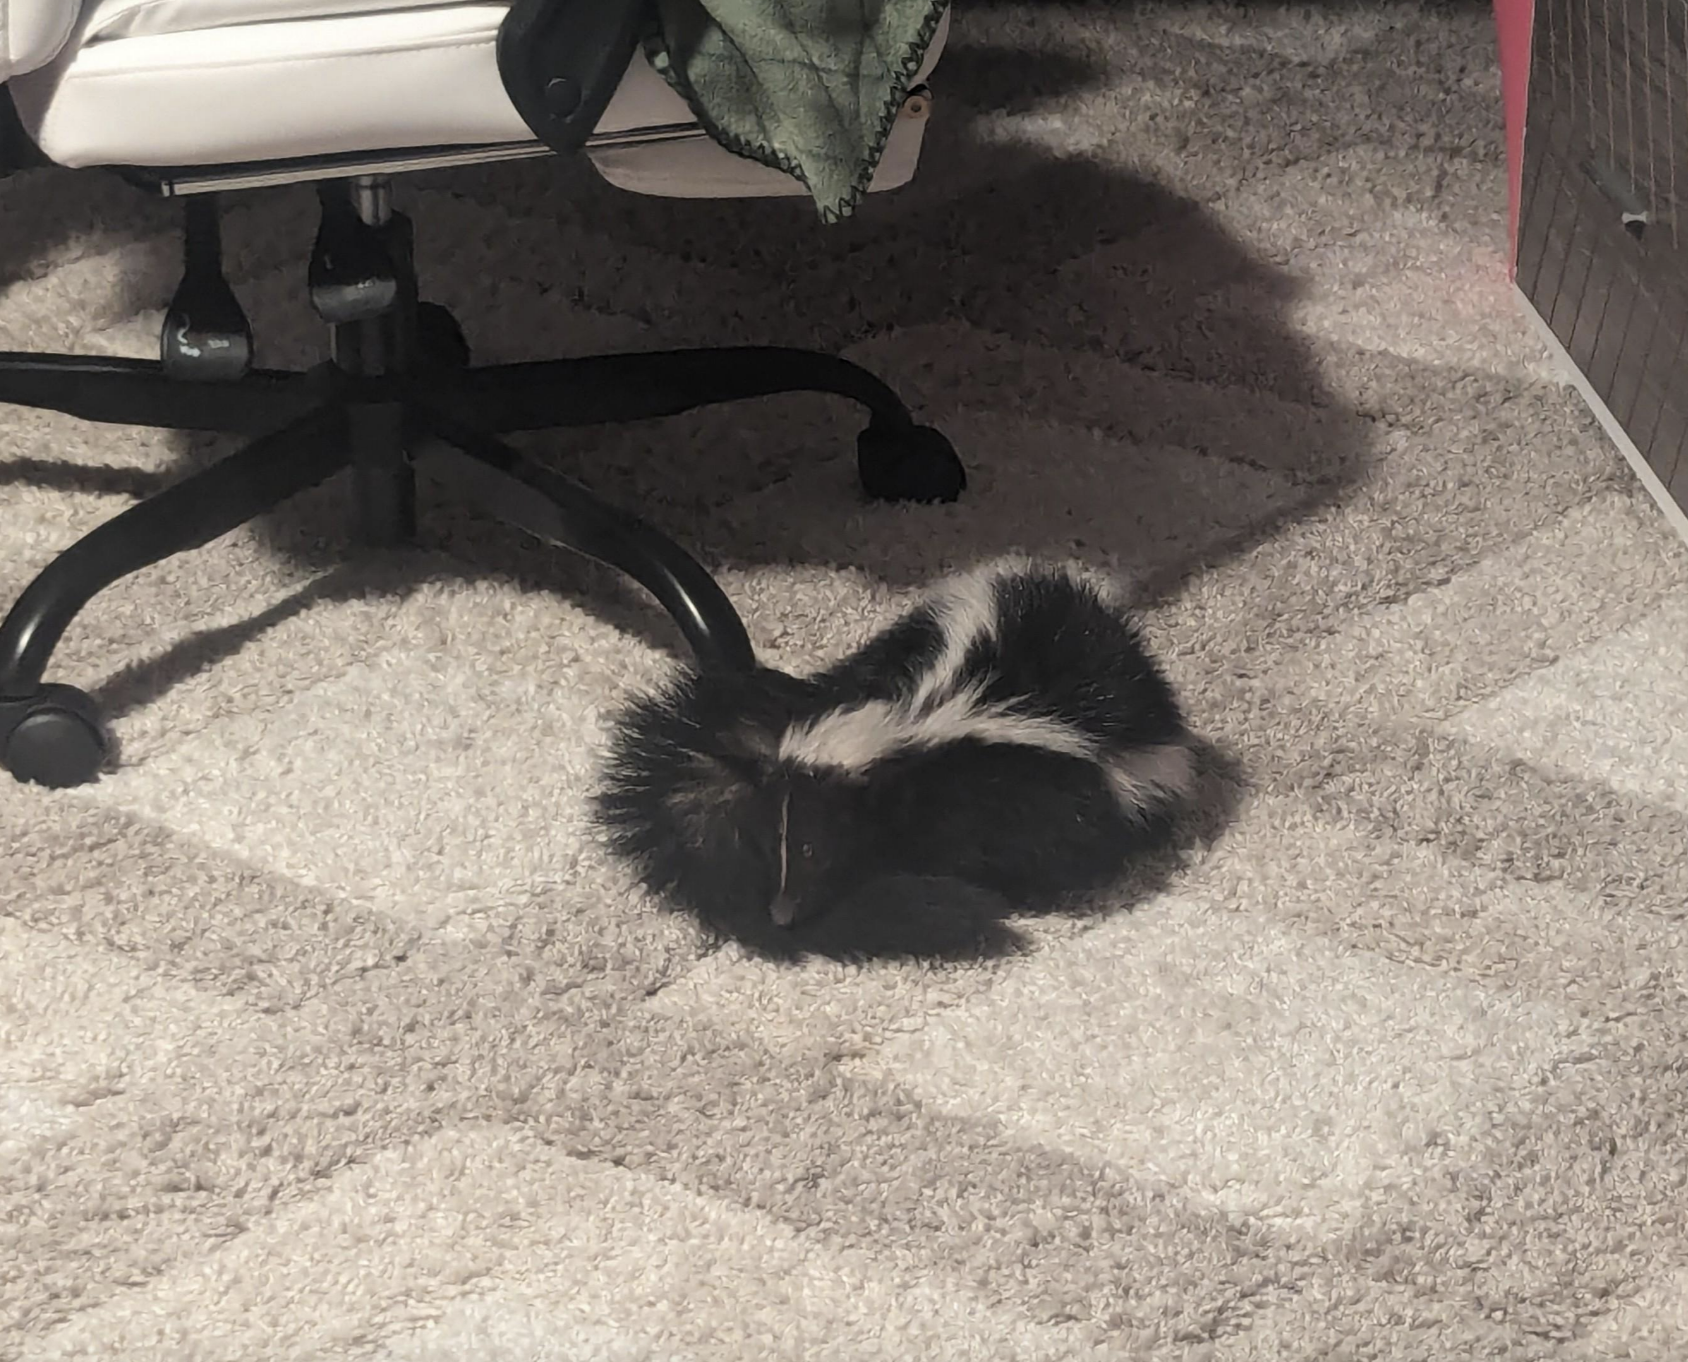 A skunk is on a carpeted floor near a chair and a red object to the side